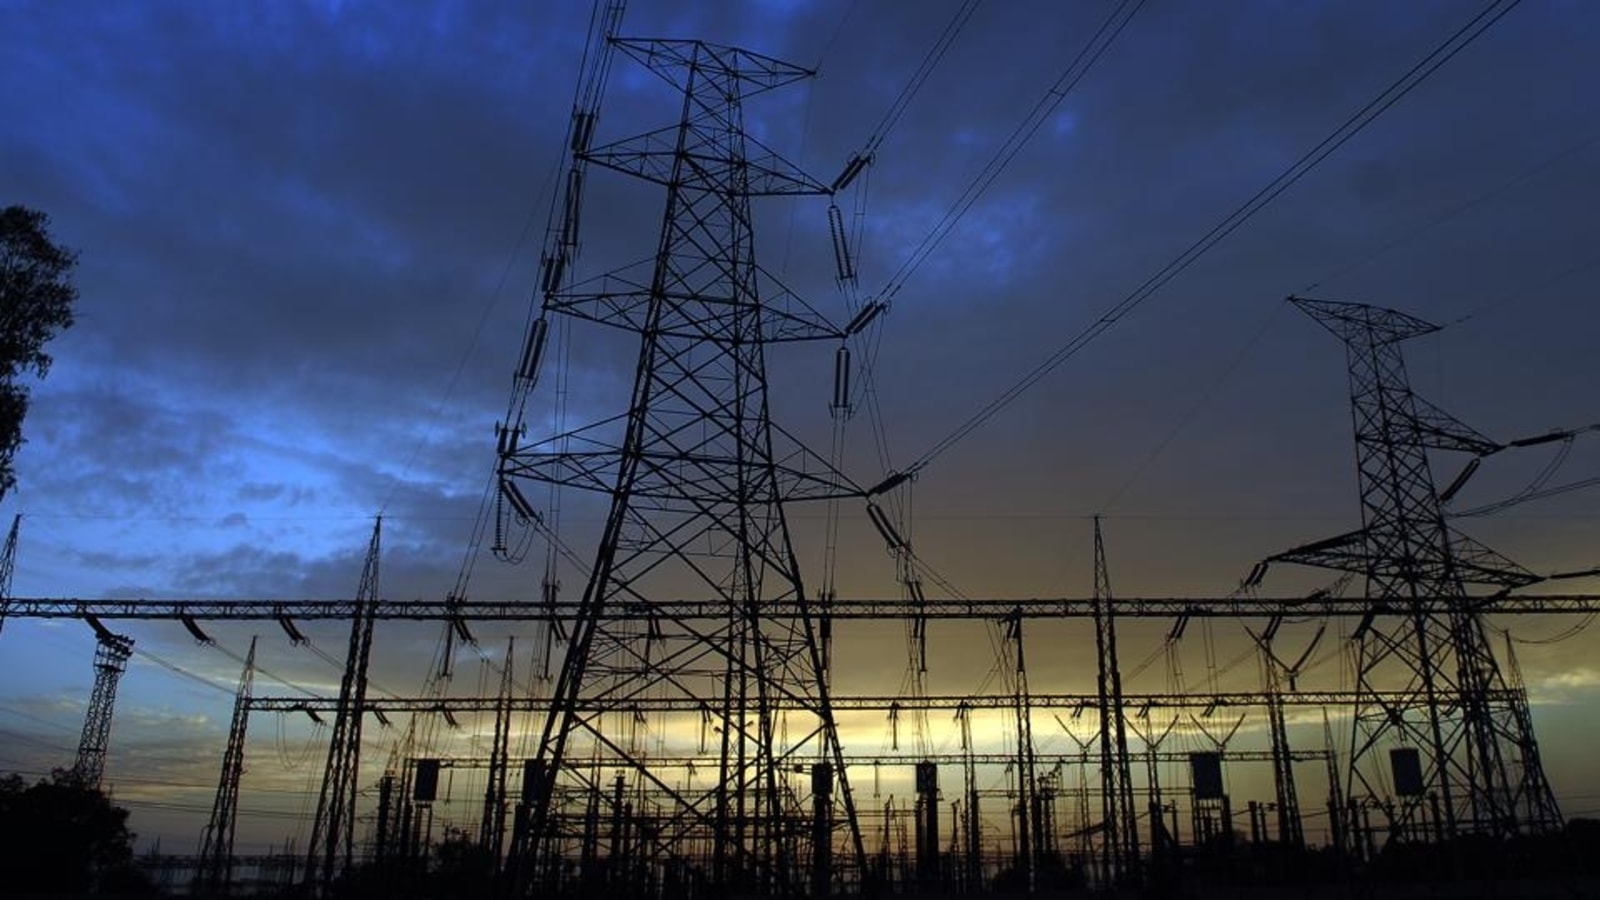 Karachi, Lahore among Pakistan's major cities hit by huge power outage